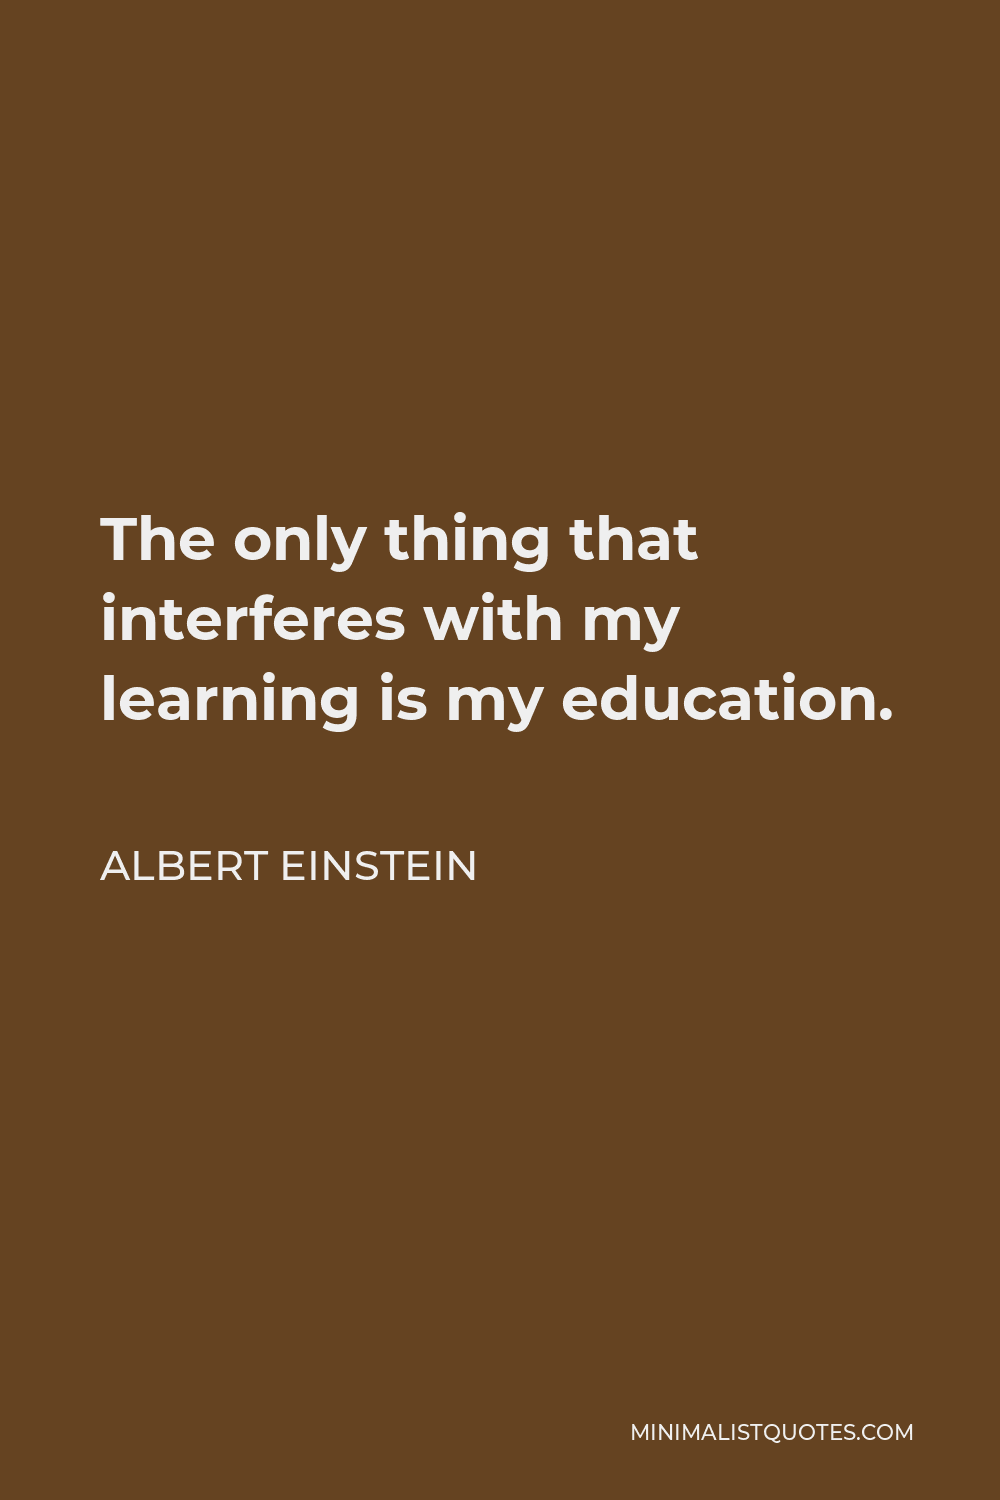 Albert Einstein Quote - The only thing that interferes with my learning is my education.